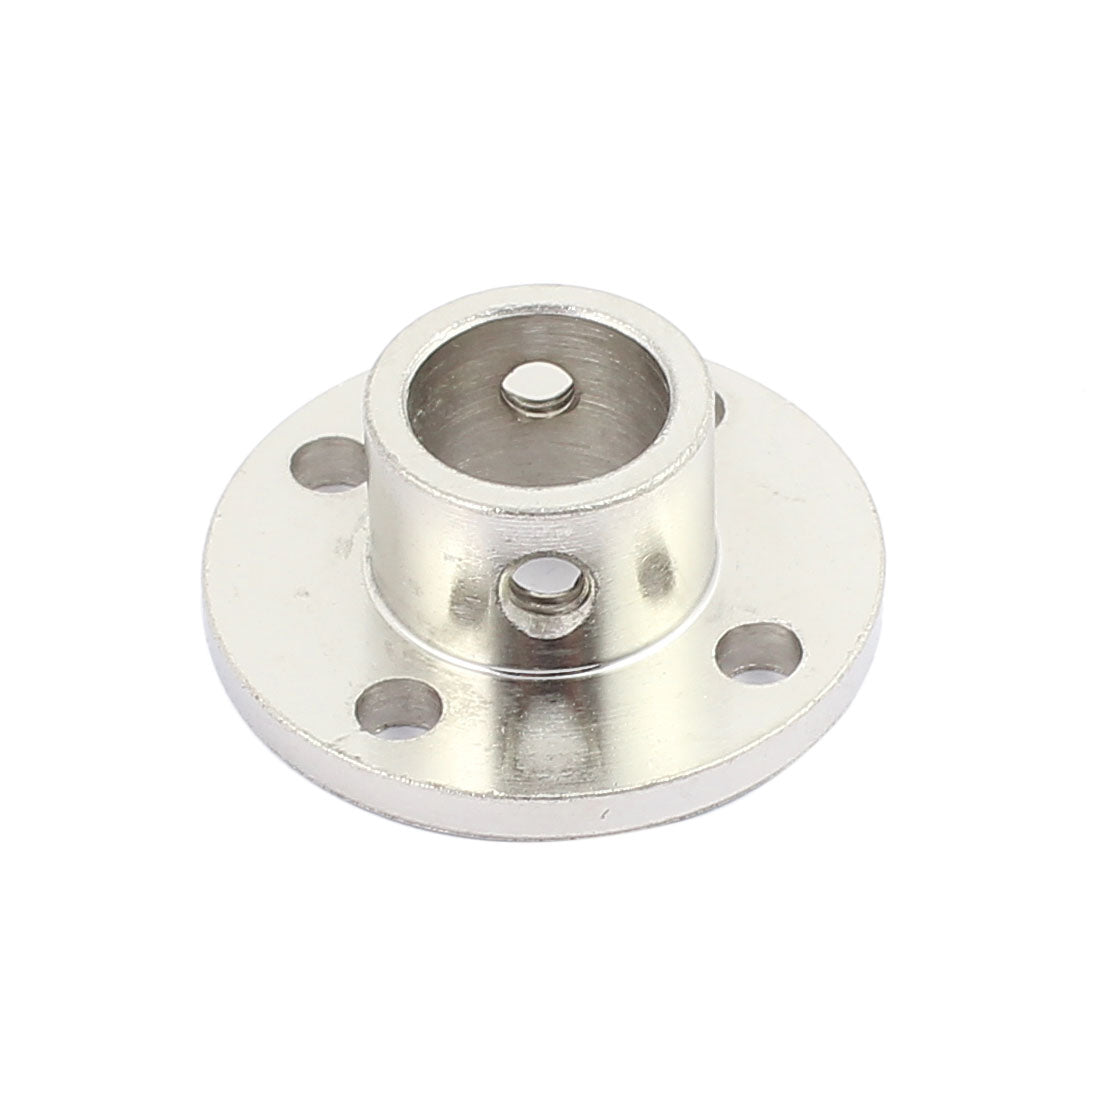 uxcell Uxcell Rigid Flange Coupling Motor Guide Shaft Coupler Motor Connector for DIY Parts silver